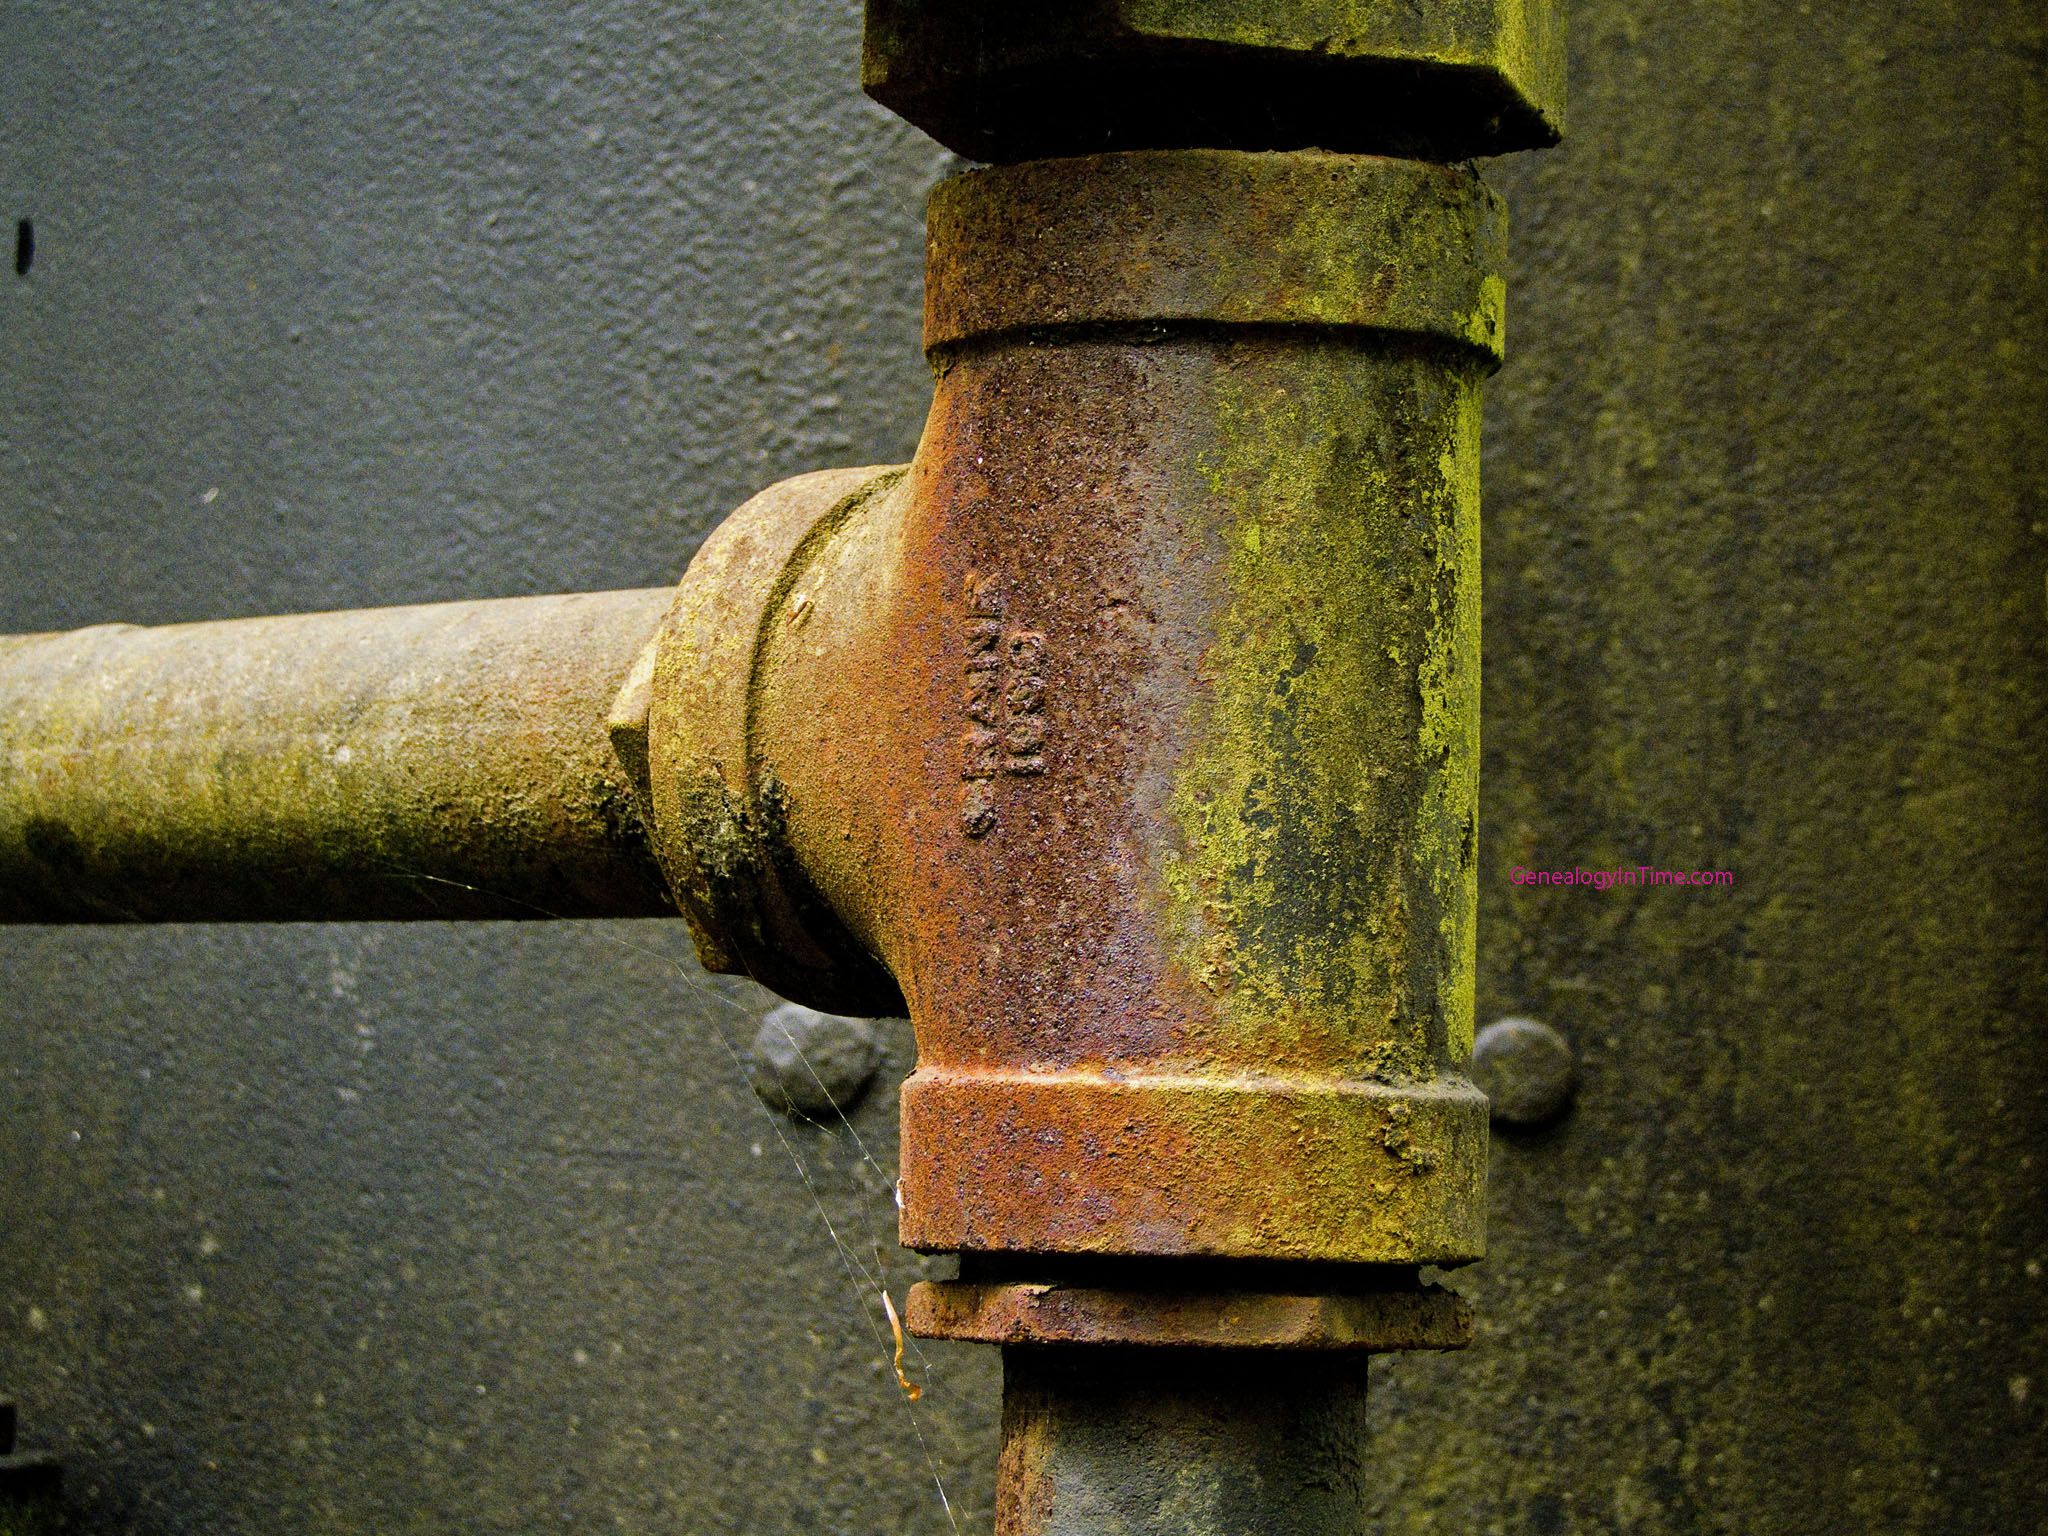 rusted pipes - Google Search | Rust - peeling paint - abstract ...